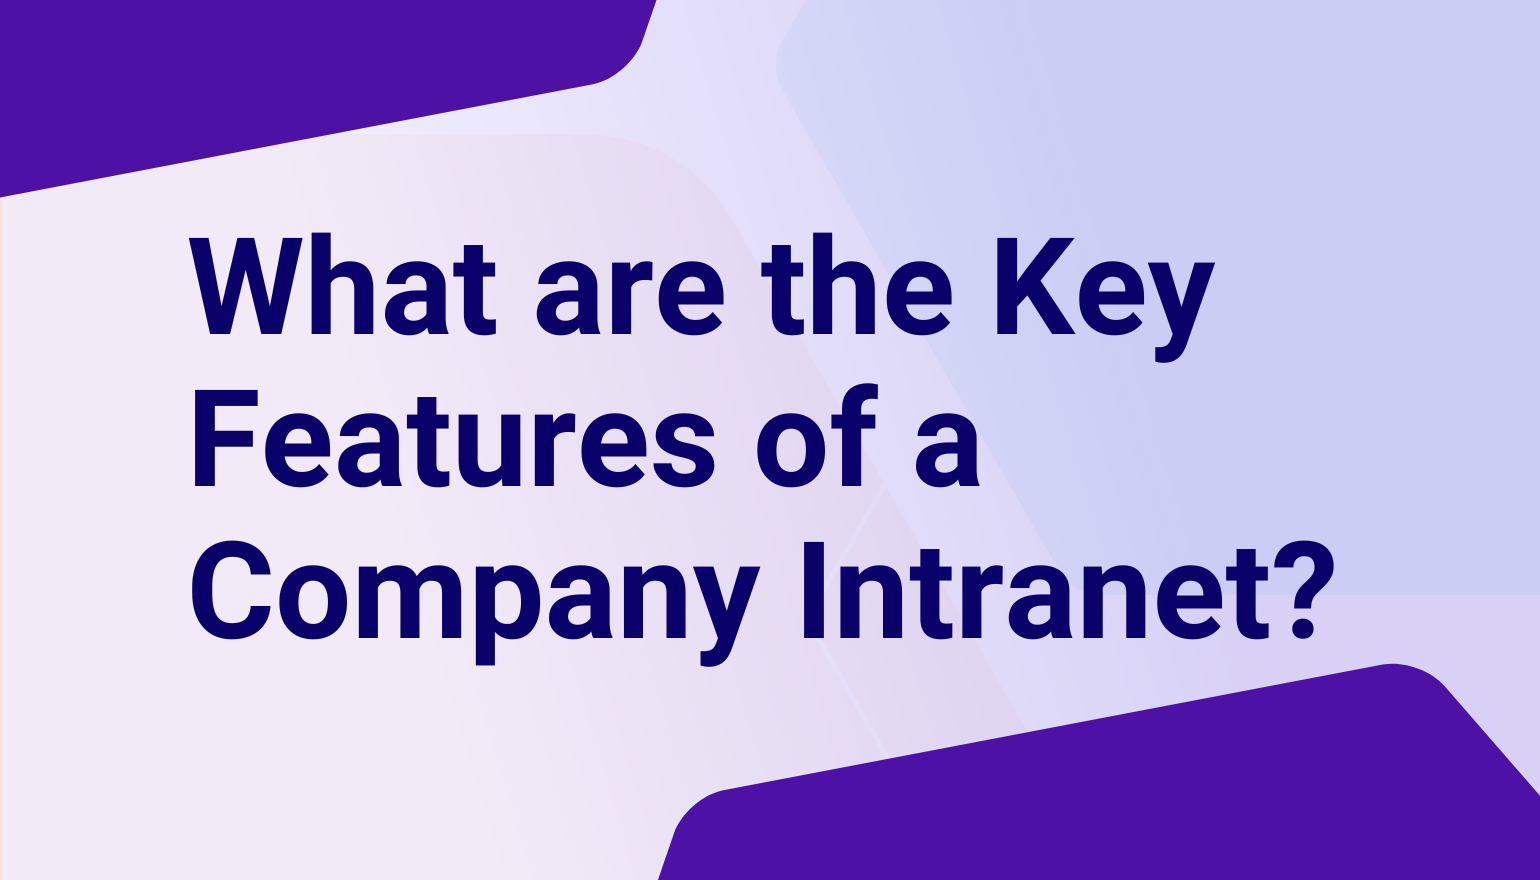 What are the Key Features of a Company Intranet?